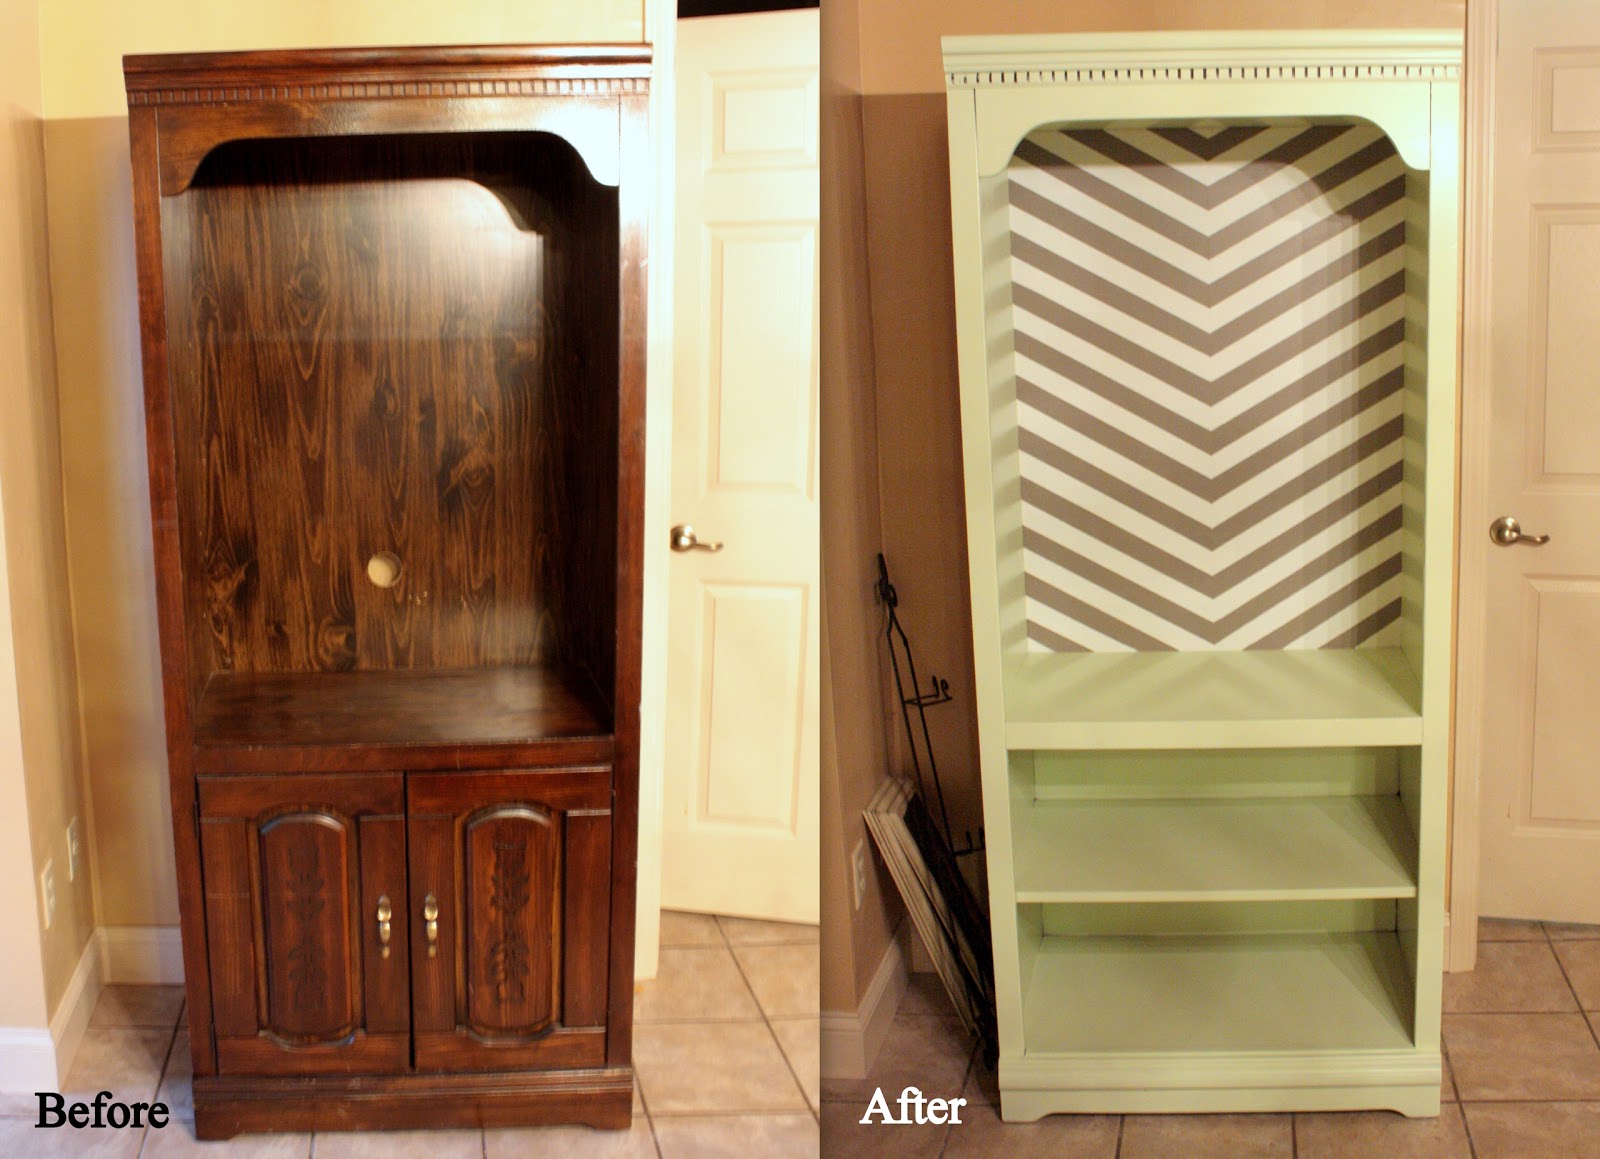 How To Refinish Old Wood Furniture Furniture Design Ideas